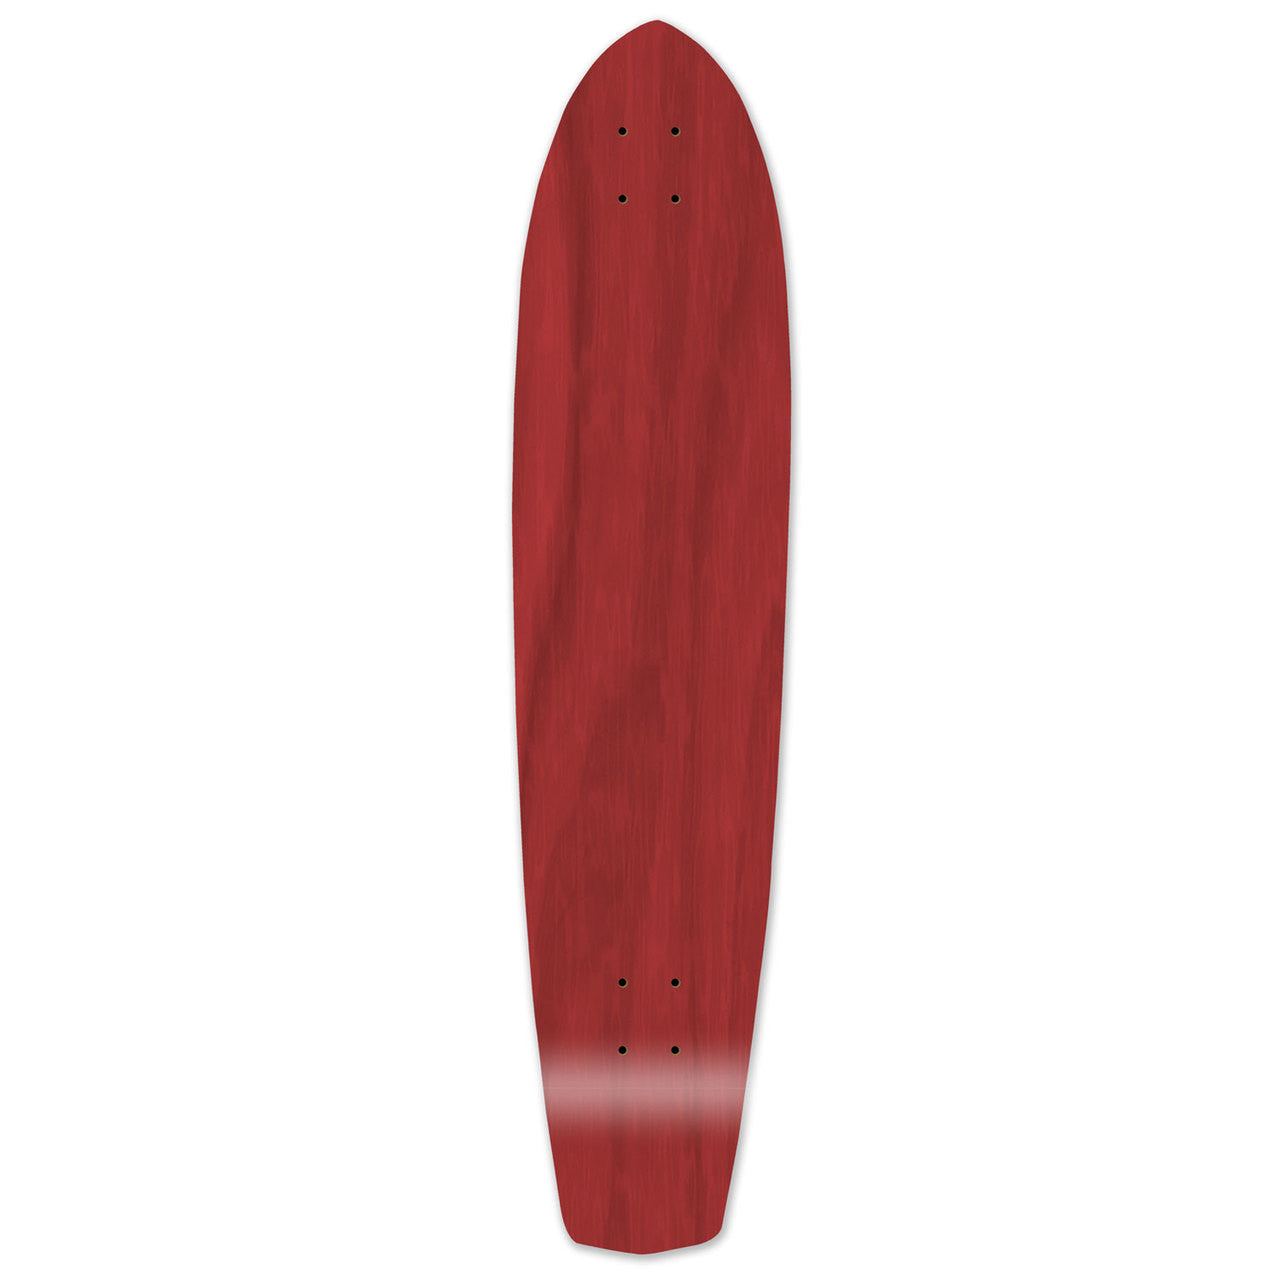 Yocaher Slimkick Longboard Deck - Stained Red